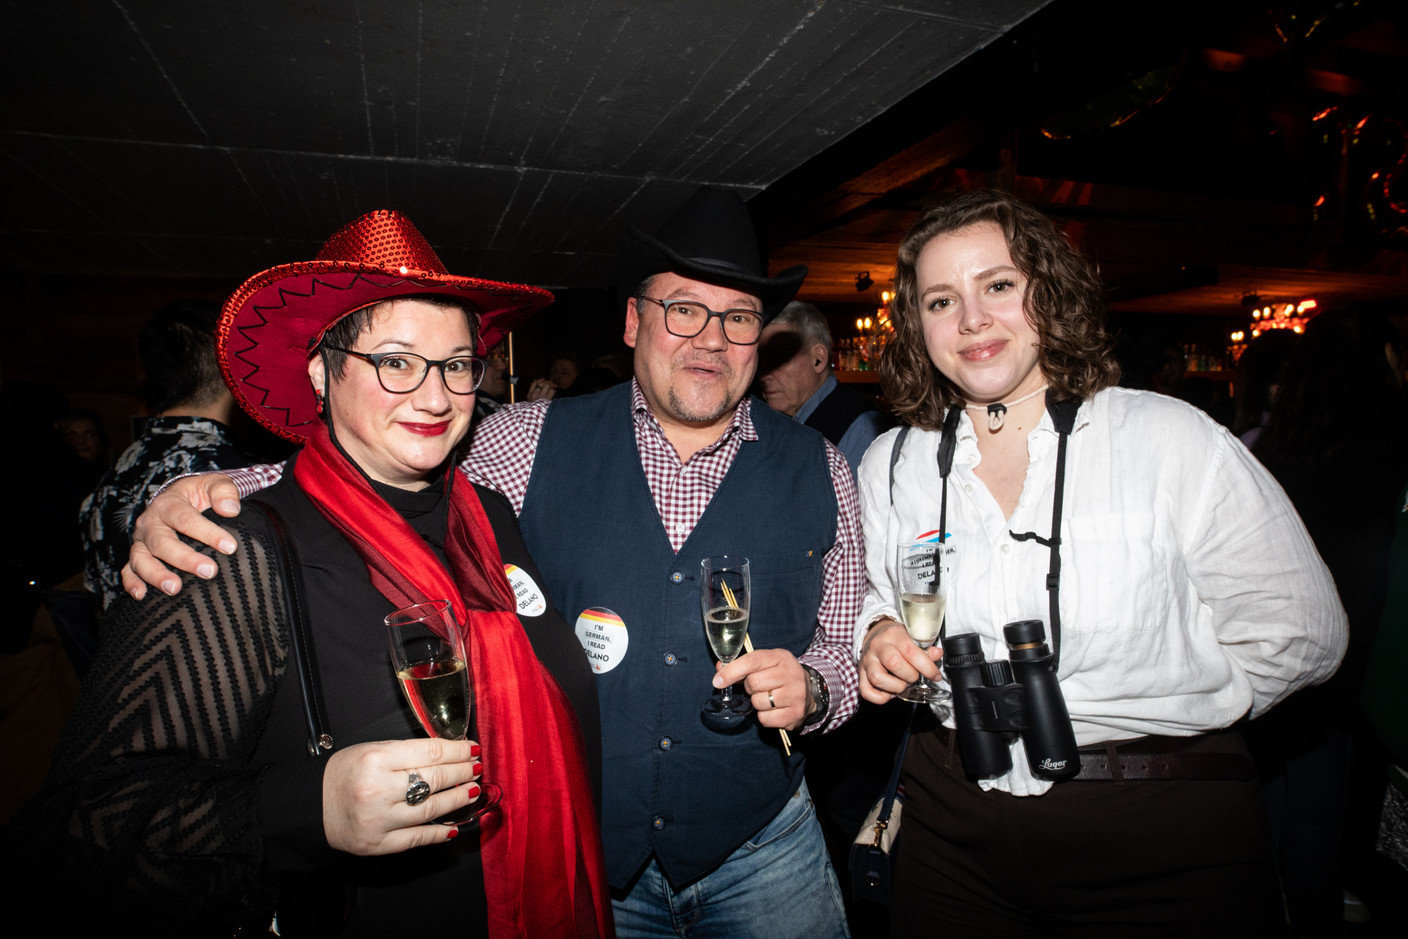 Attendees are seen during Delano’s 12th anniversary party, 23 February 2023. Photo: Eva Krins/Maison Moderne